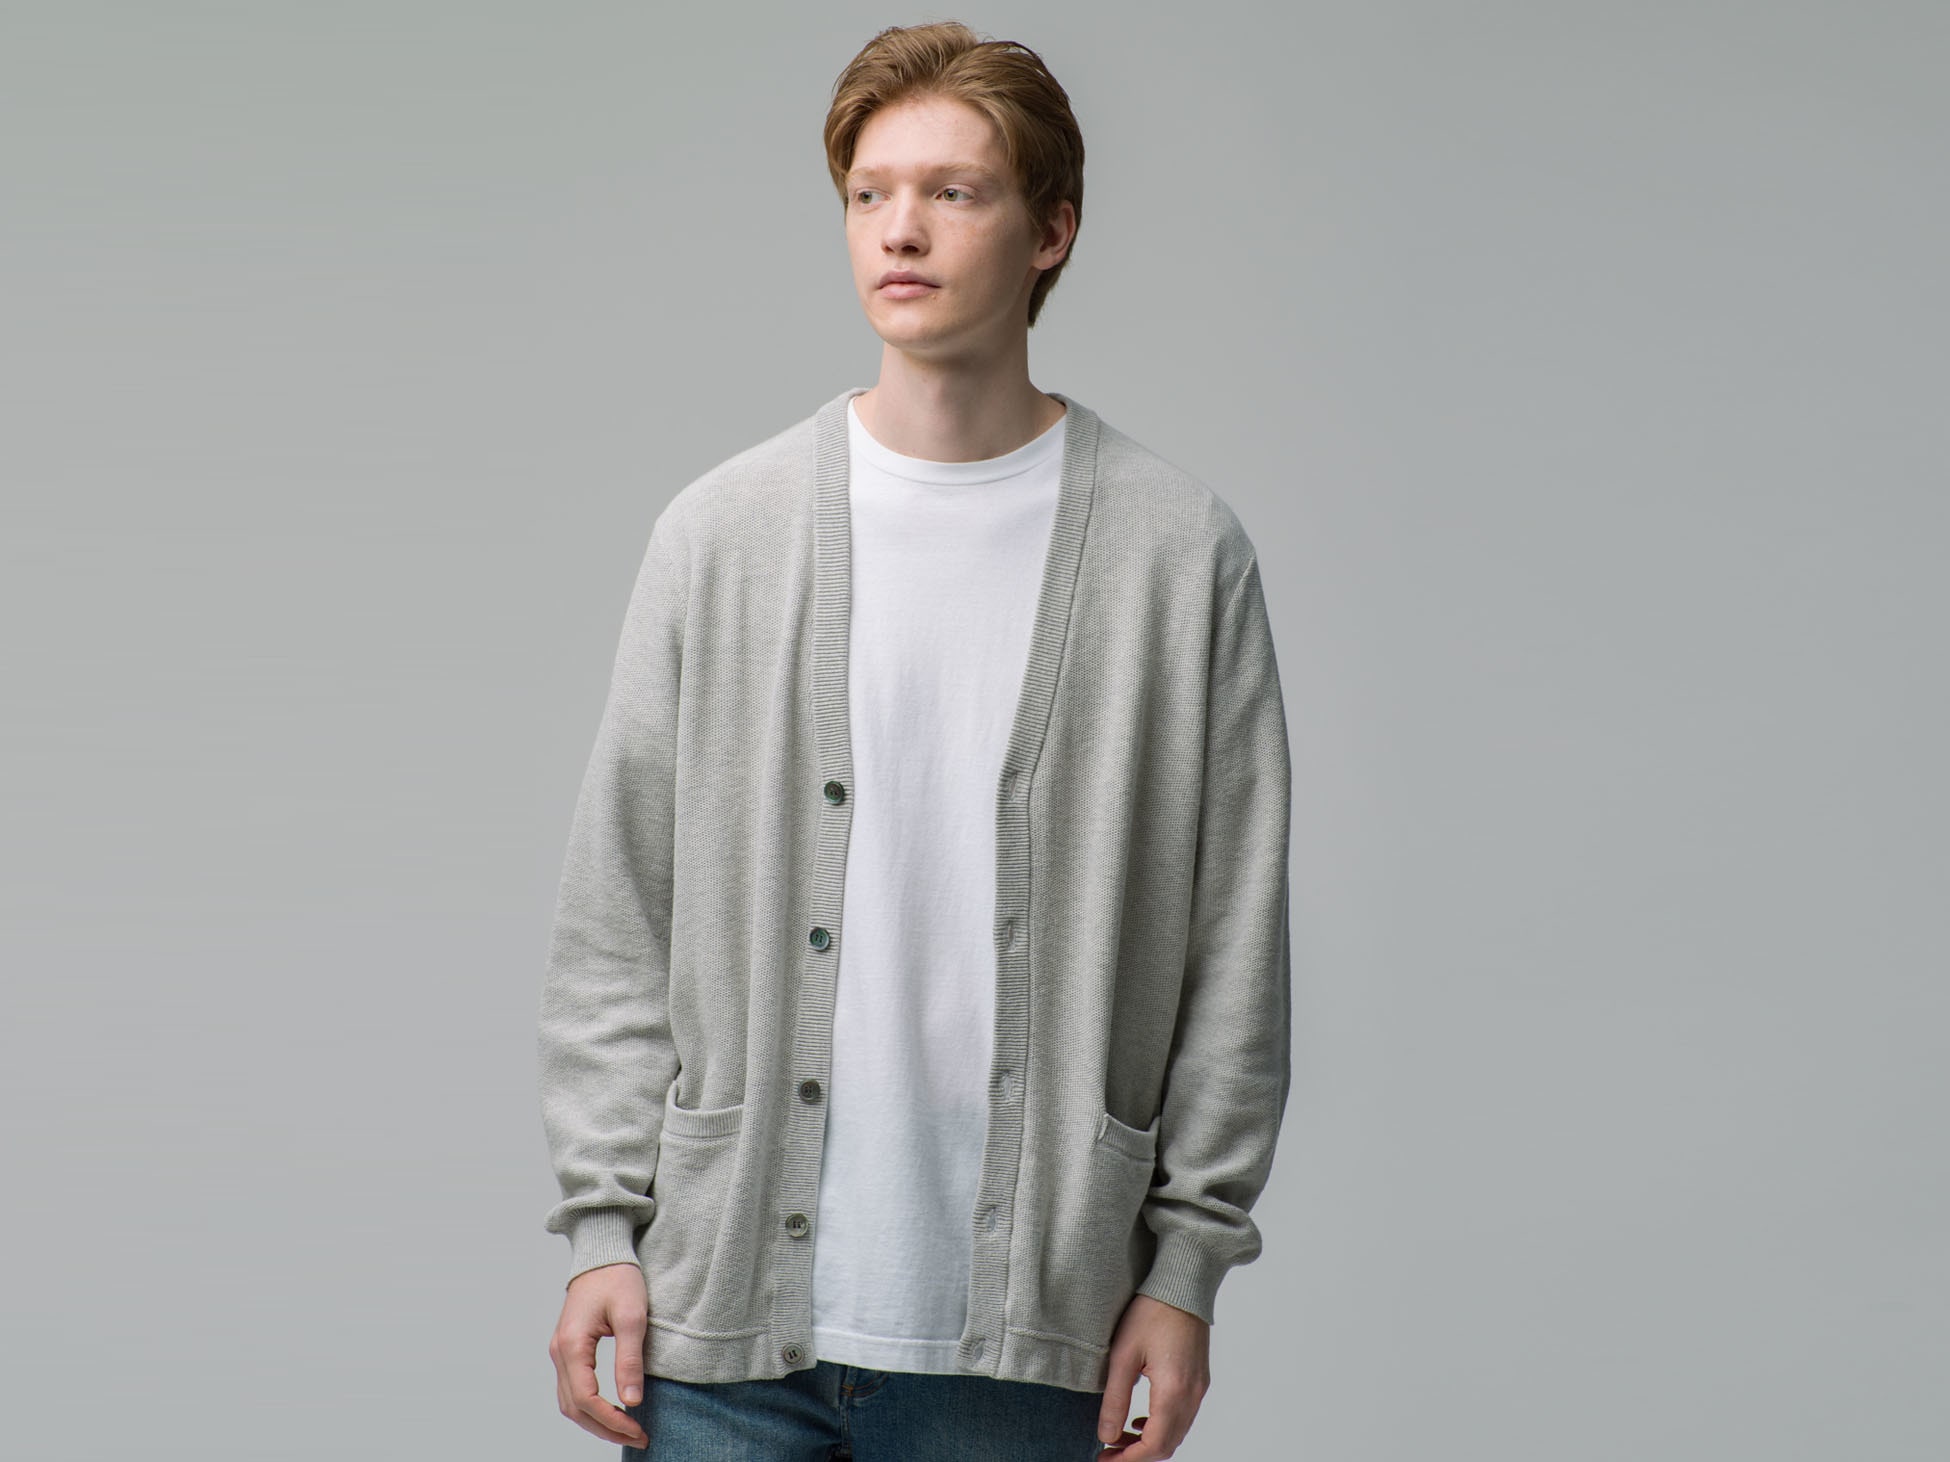 SUNSPEL for Ron Herman Cotton Knit Series 12.24(Sat) New Arrival ...